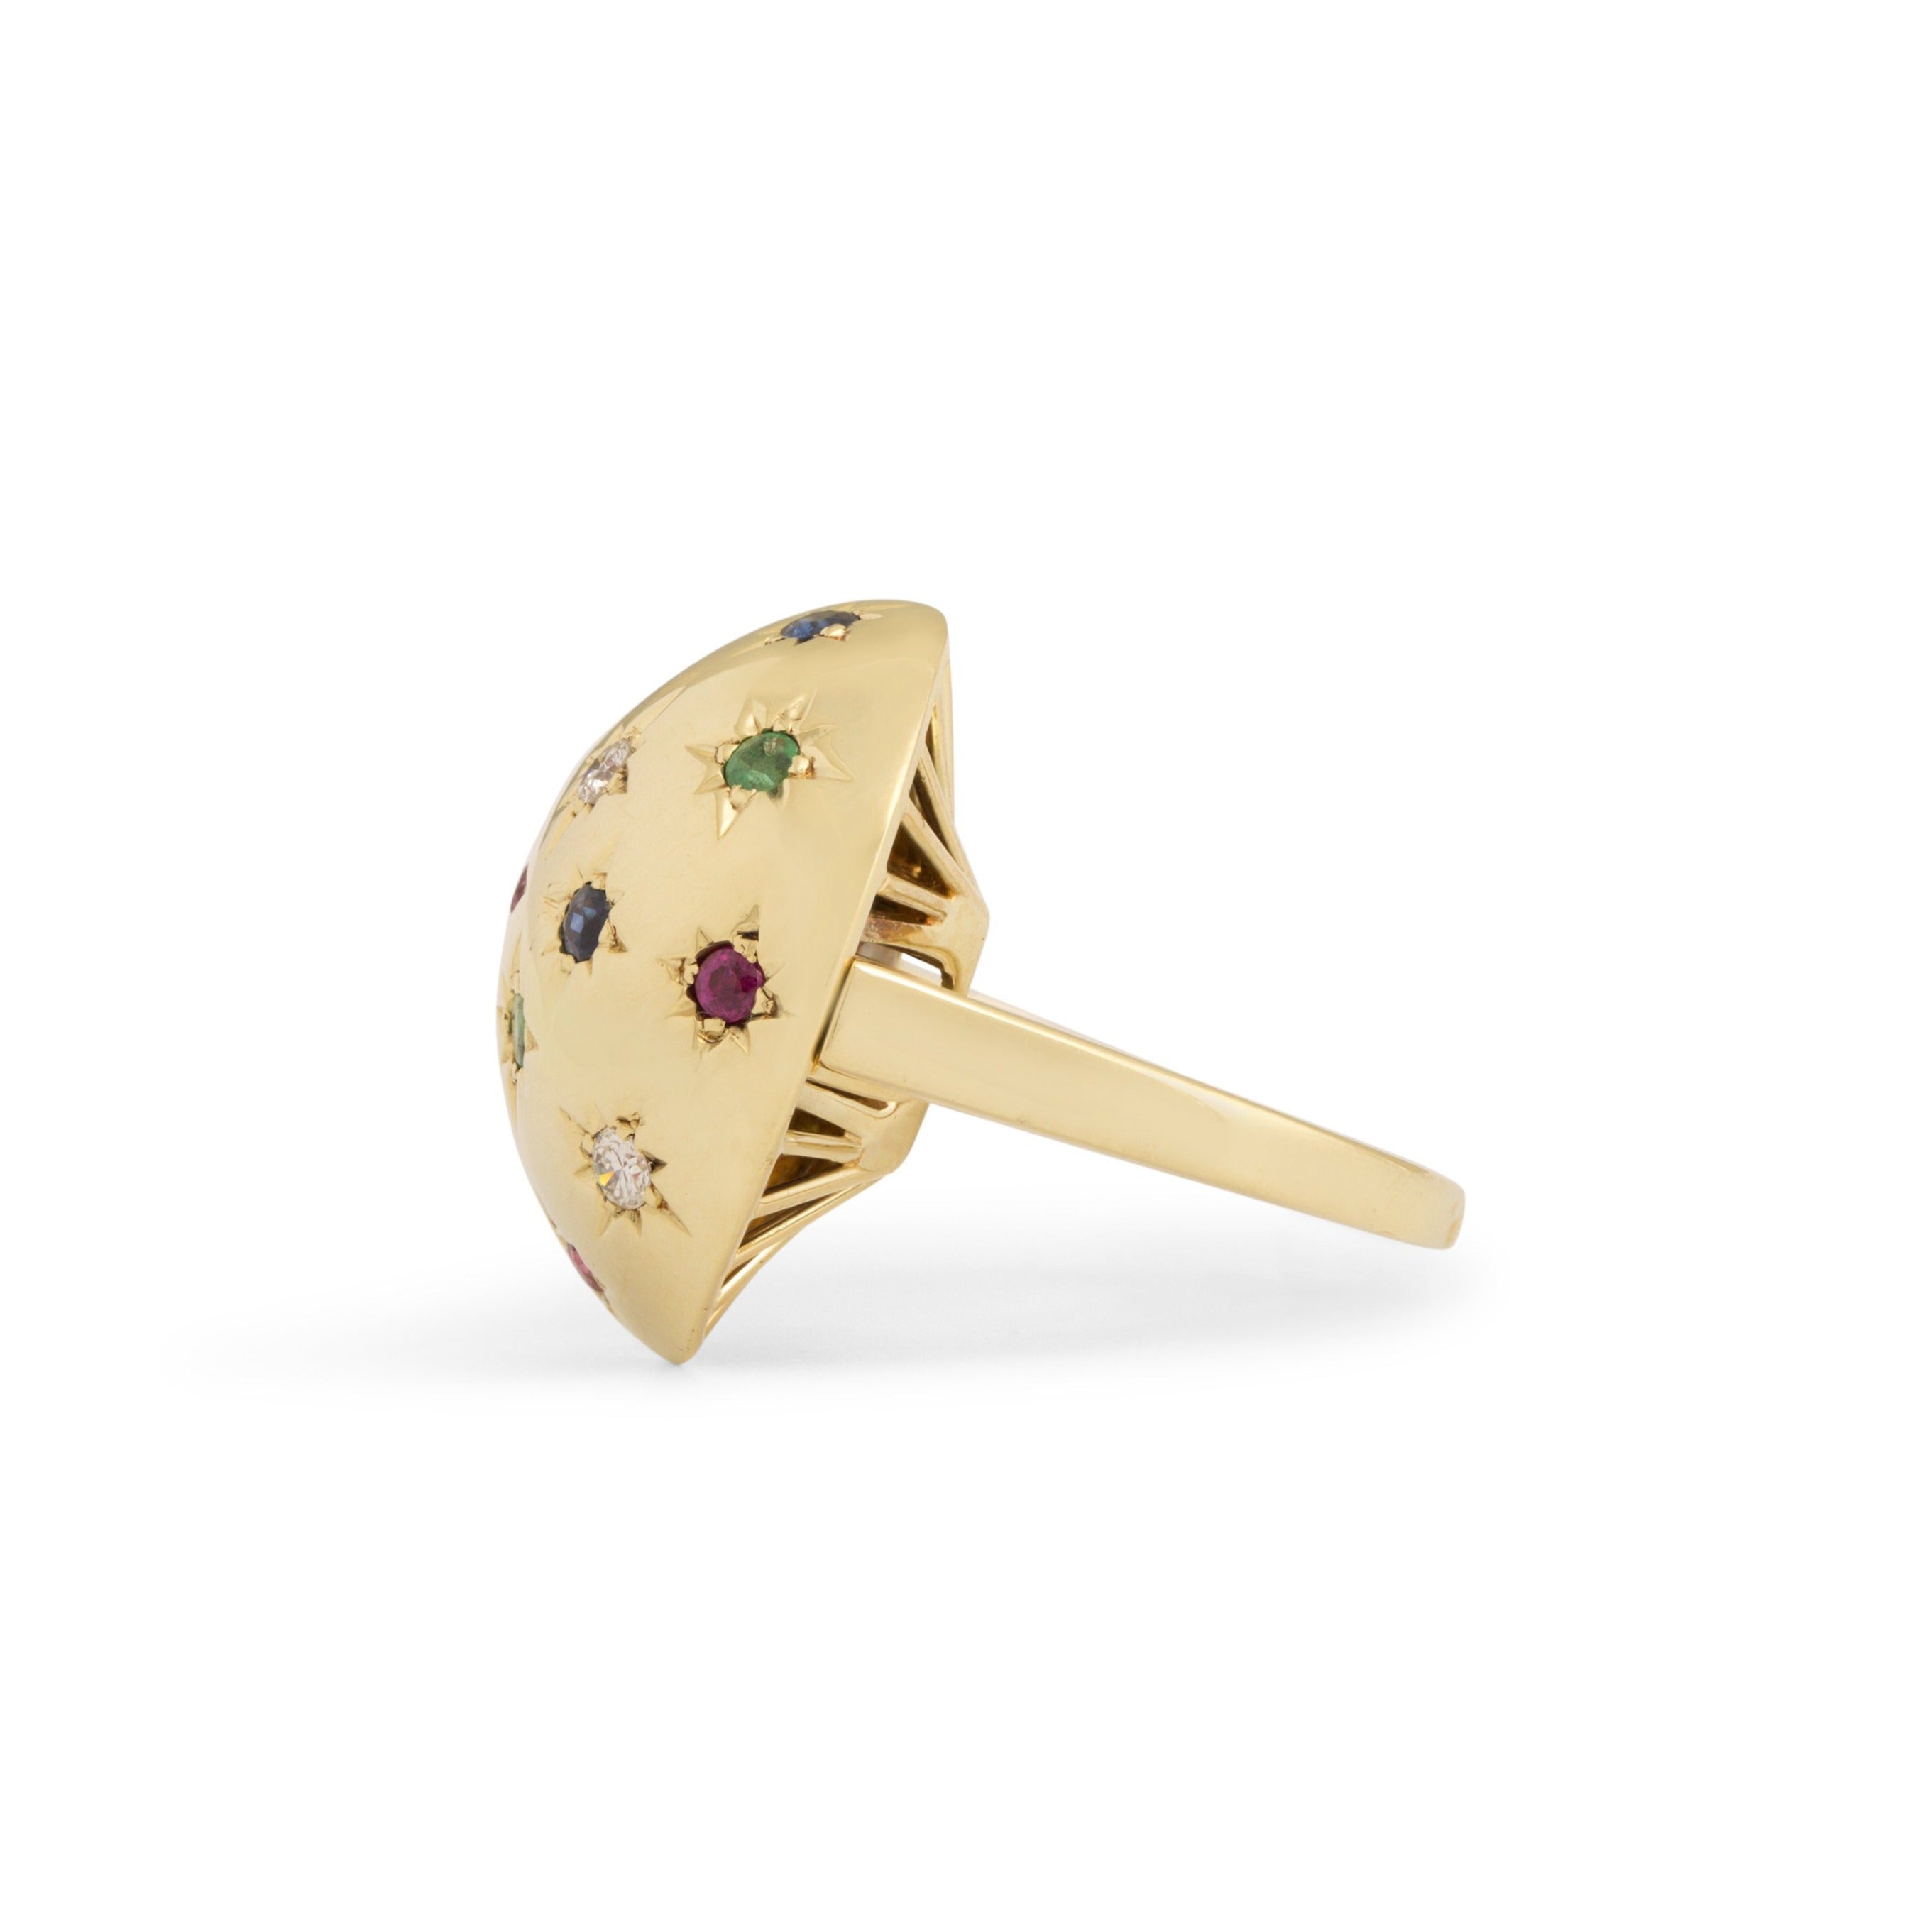 Starburst Diamond, Emerald, Ruby, and Sapphire 14k Gold Dome Ring